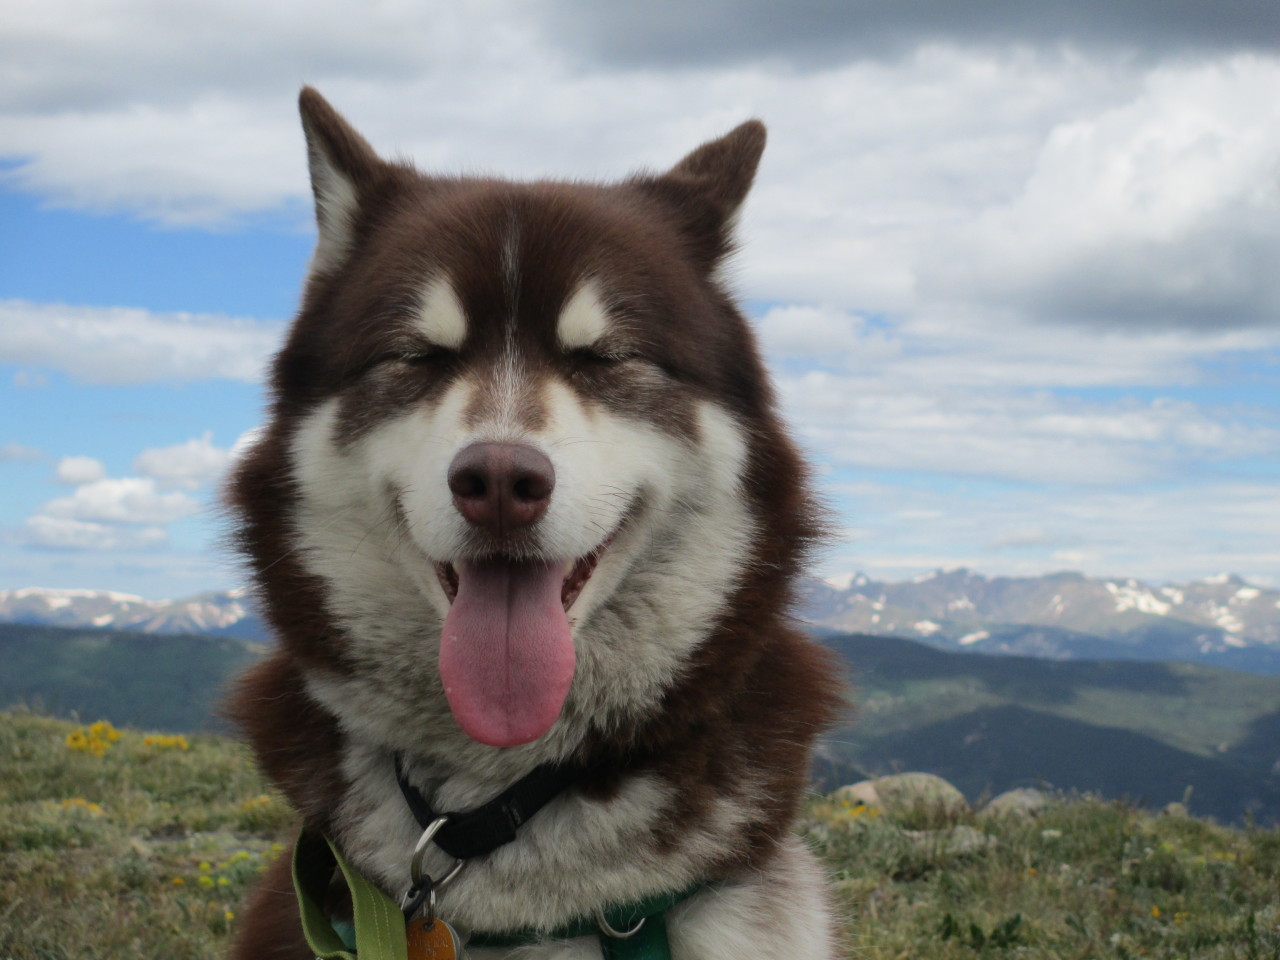 handsomedogs:
“Max on top of the world at Mt. Evans.
”